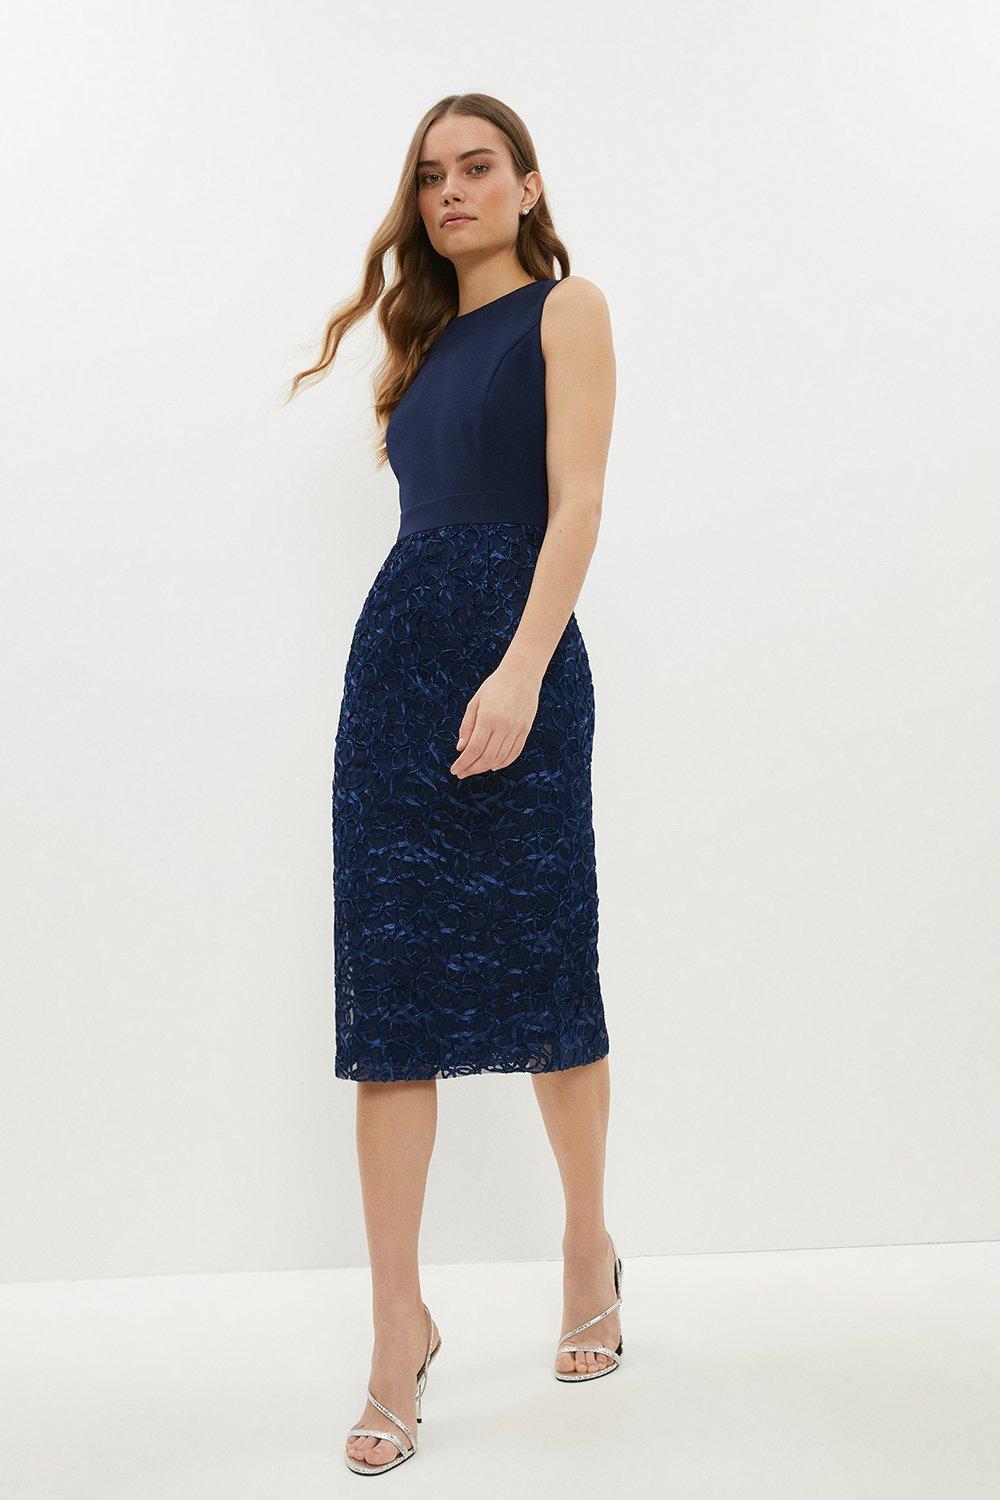 Embroidered Skirt 2 In 1 Pencil Dress - Navy